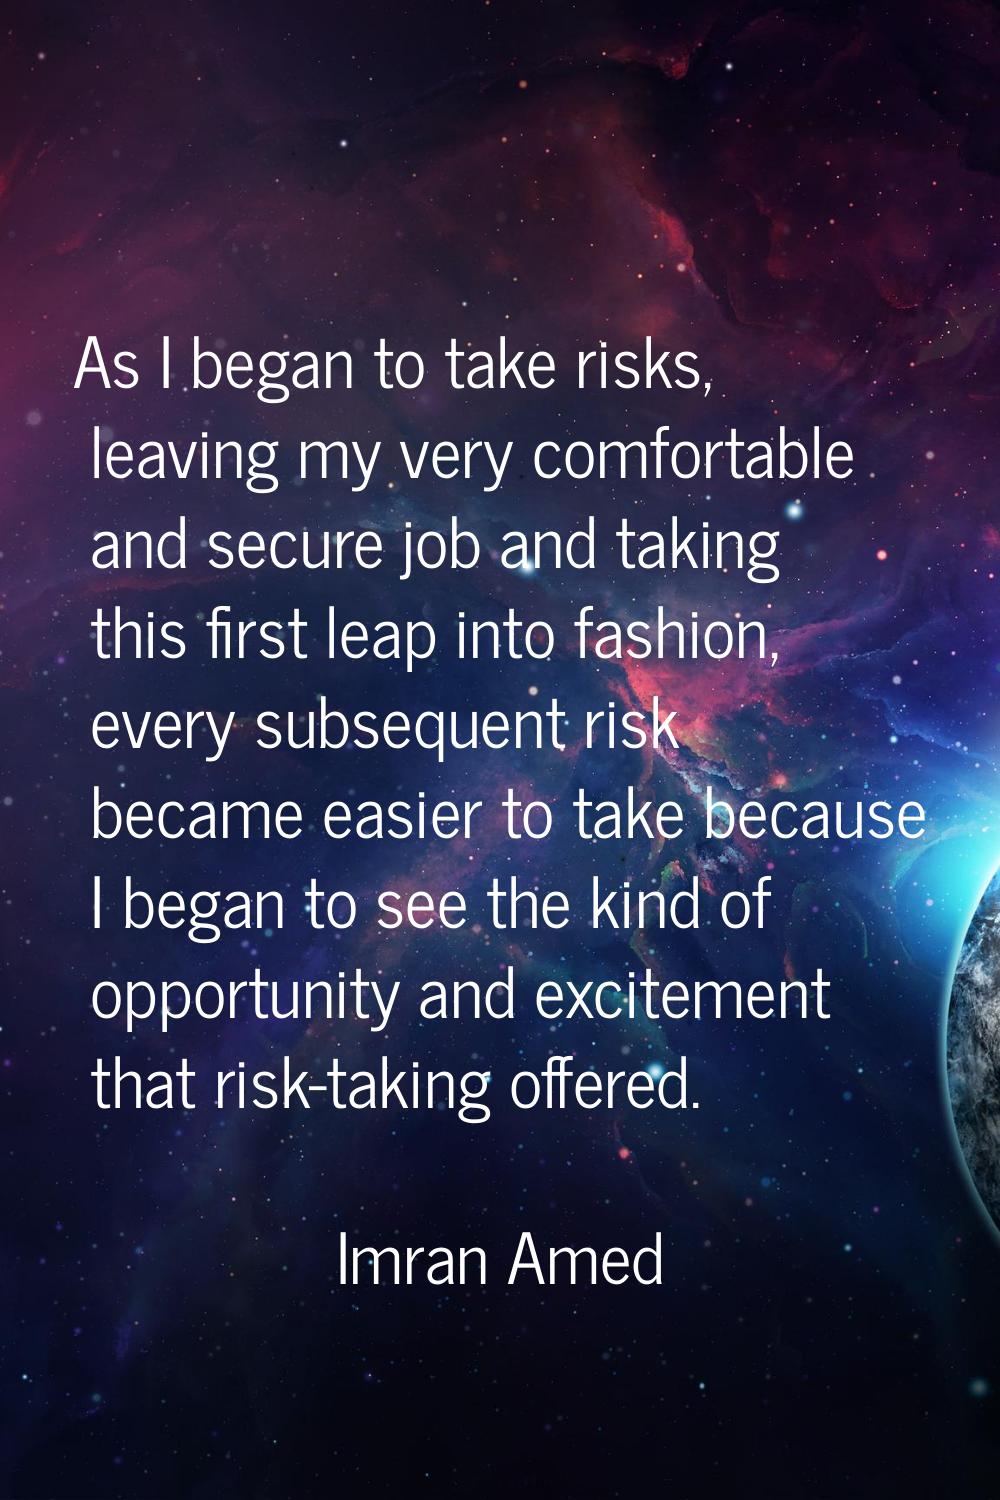 As I began to take risks, leaving my very comfortable and secure job and taking this first leap int